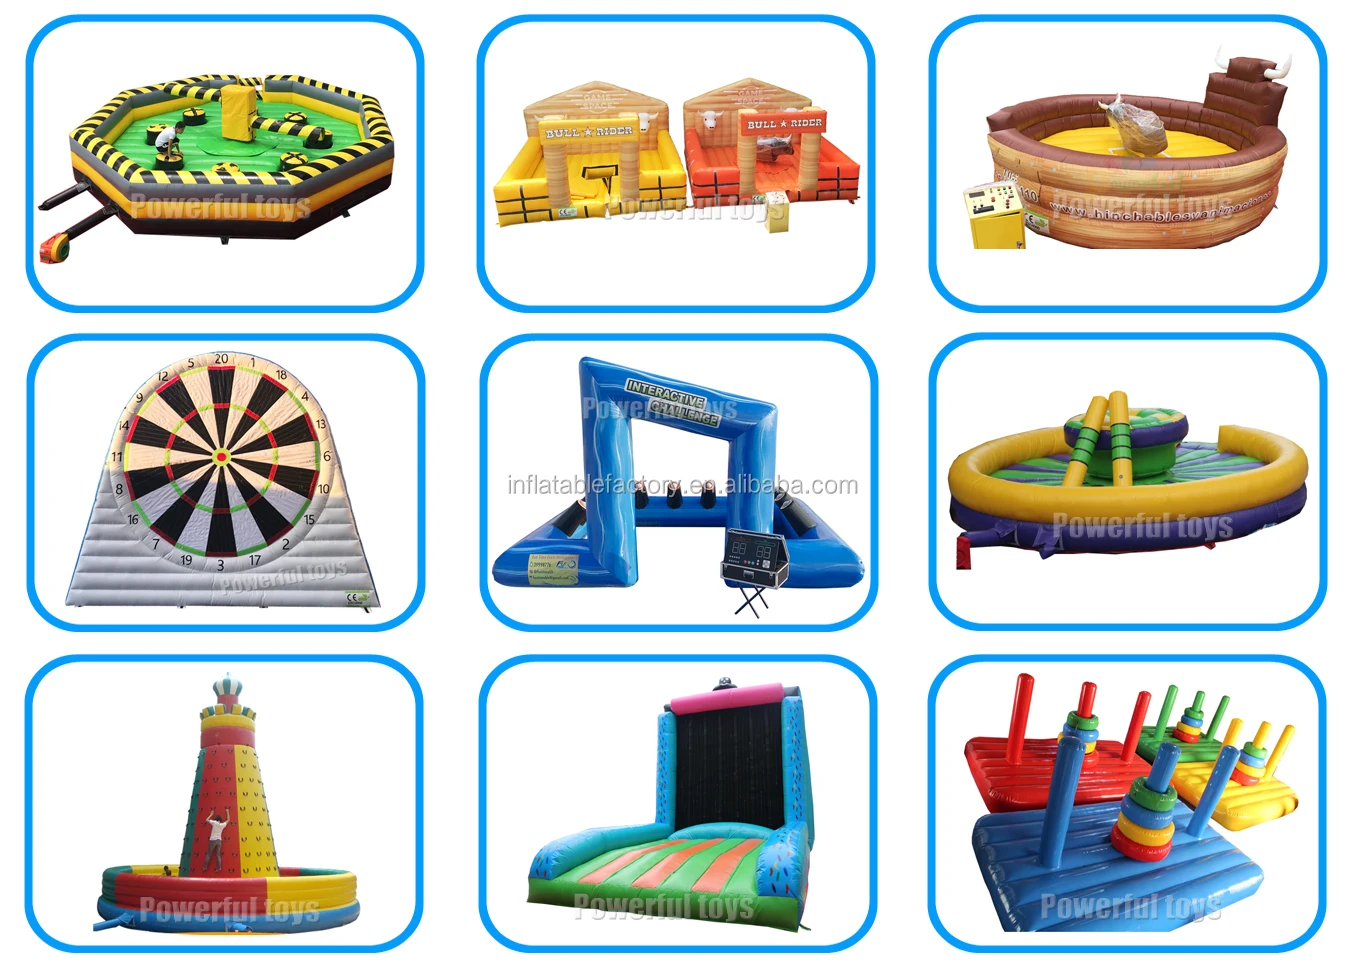 Competitive games interactive cones inflatable arena for IPS interactive play system